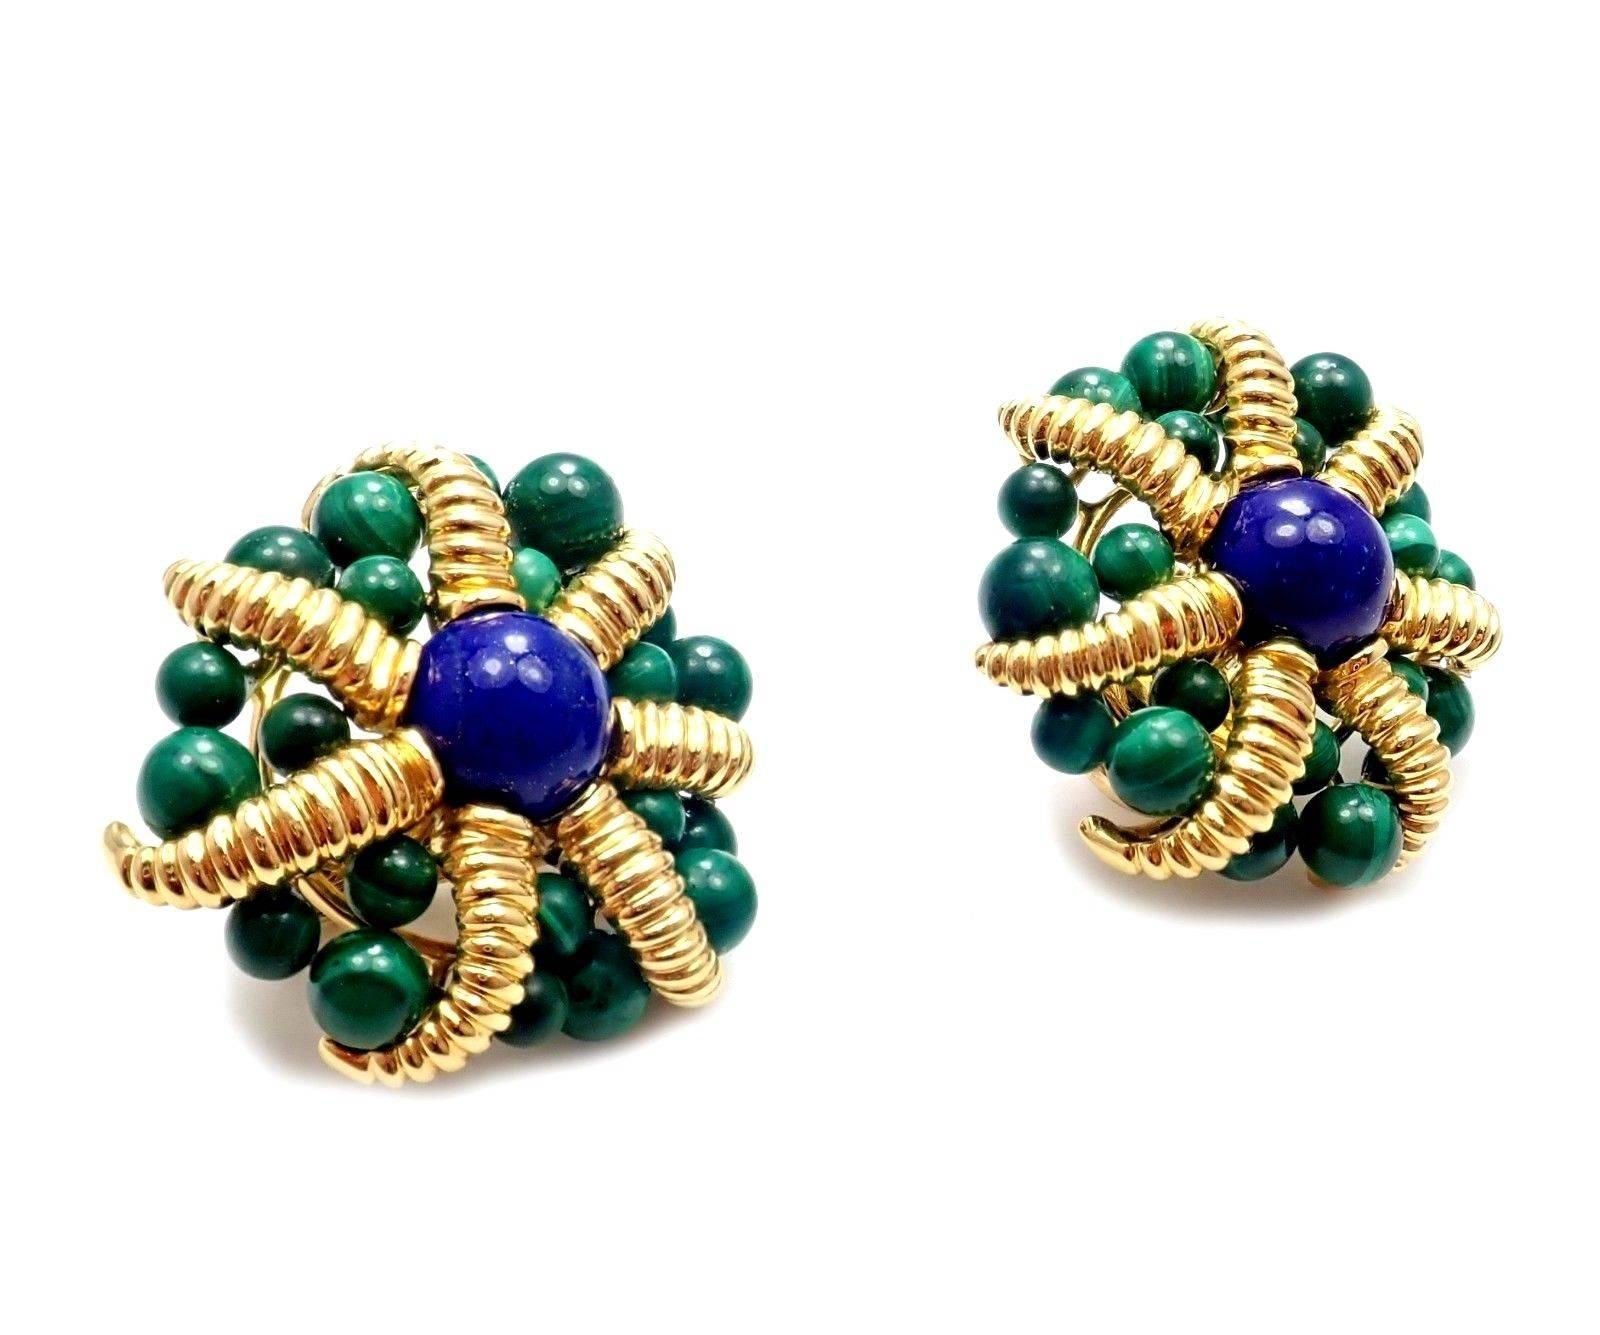 18k Yellow Gold Lapis Lazuli And Malachite Large Earrings by Tiffany & Co. 
With 2x Lapis Lazuli: 10mm each
42x Malachite: 4mm to 6mm
These earrings are made for pierced ears.
Details: 
Weight:  42.5 grams
Dimensions: 32mm
Stamped Hallmarks: 